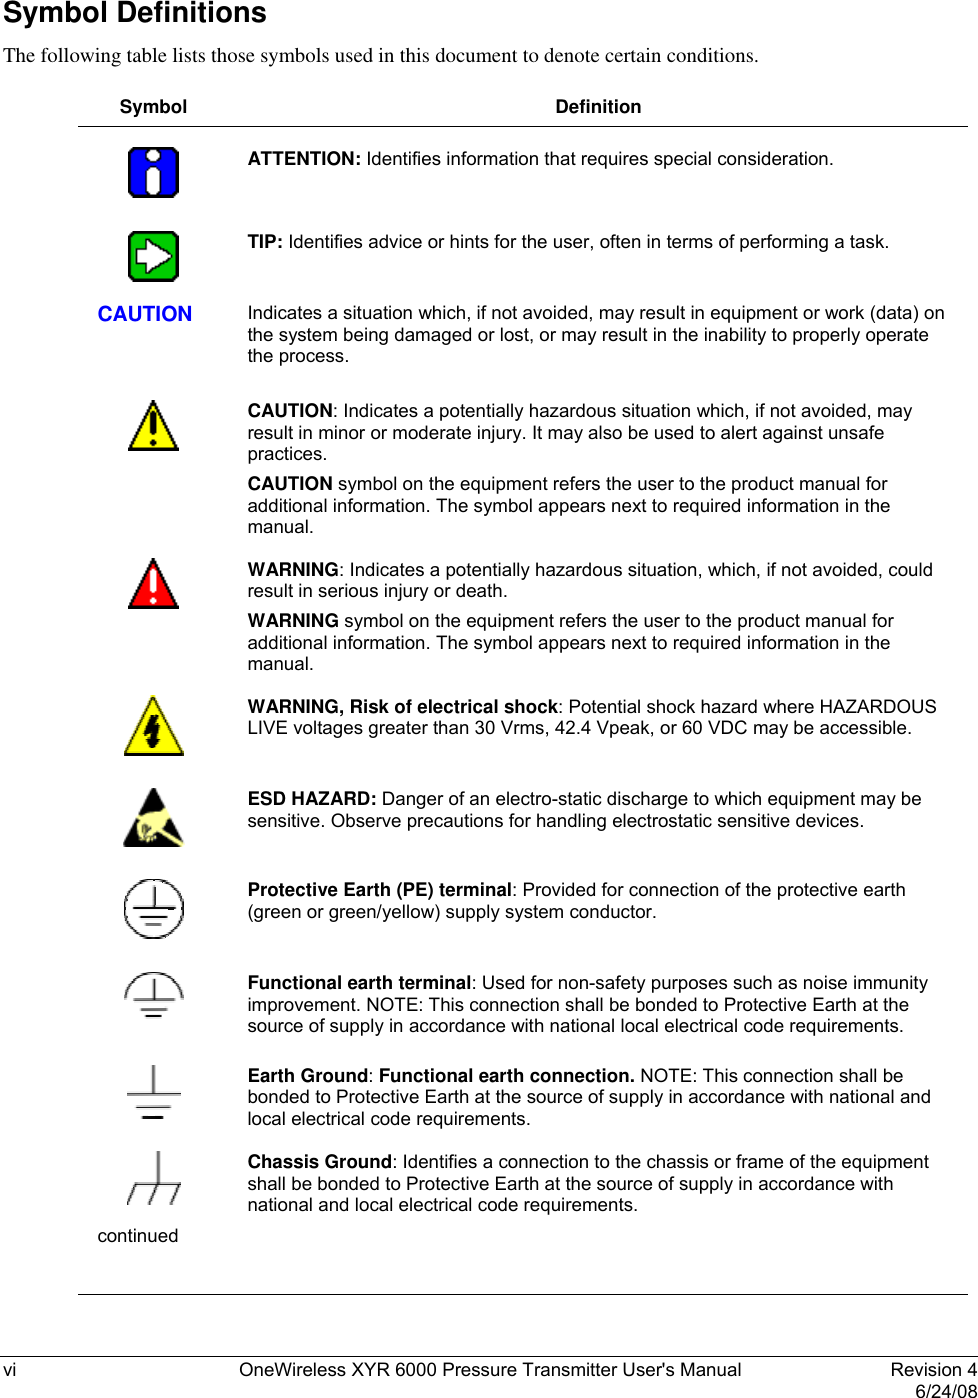  vi  OneWireless XYR 6000 Pressure Transmitter User&apos;s Manual   Revision 4   6/24/08 Symbol Definitions The following table lists those symbols used in this document to denote certain conditions.  Symbol Definition     ATTENTION: Identifies information that requires special consideration.     TIP: Identifies advice or hints for the user, often in terms of performing a task.   CAUTION  Indicates a situation which, if not avoided, may result in equipment or work (data) on the system being damaged or lost, or may result in the inability to properly operate the process.      CAUTION: Indicates a potentially hazardous situation which, if not avoided, may result in minor or moderate injury. It may also be used to alert against unsafe practices.  CAUTION symbol on the equipment refers the user to the product manual for additional information. The symbol appears next to required information in the manual.     WARNING: Indicates a potentially hazardous situation, which, if not avoided, could result in serious injury or death. WARNING symbol on the equipment refers the user to the product manual for additional information. The symbol appears next to required information in the manual.     WARNING, Risk of electrical shock: Potential shock hazard where HAZARDOUS LIVE voltages greater than 30 Vrms, 42.4 Vpeak, or 60 VDC may be accessible.     ESD HAZARD: Danger of an electro-static discharge to which equipment may be sensitive. Observe precautions for handling electrostatic sensitive devices.     Protective Earth (PE) terminal: Provided for connection of the protective earth (green or green/yellow) supply system conductor.     Functional earth terminal: Used for non-safety purposes such as noise immunity improvement. NOTE: This connection shall be bonded to Protective Earth at the source of supply in accordance with national local electrical code requirements.     Earth Ground: Functional earth connection. NOTE: This connection shall be bonded to Protective Earth at the source of supply in accordance with national and local electrical code requirements.     Chassis Ground: Identifies a connection to the chassis or frame of the equipment shall be bonded to Protective Earth at the source of supply in accordance with national and local electrical code requirements. continued   